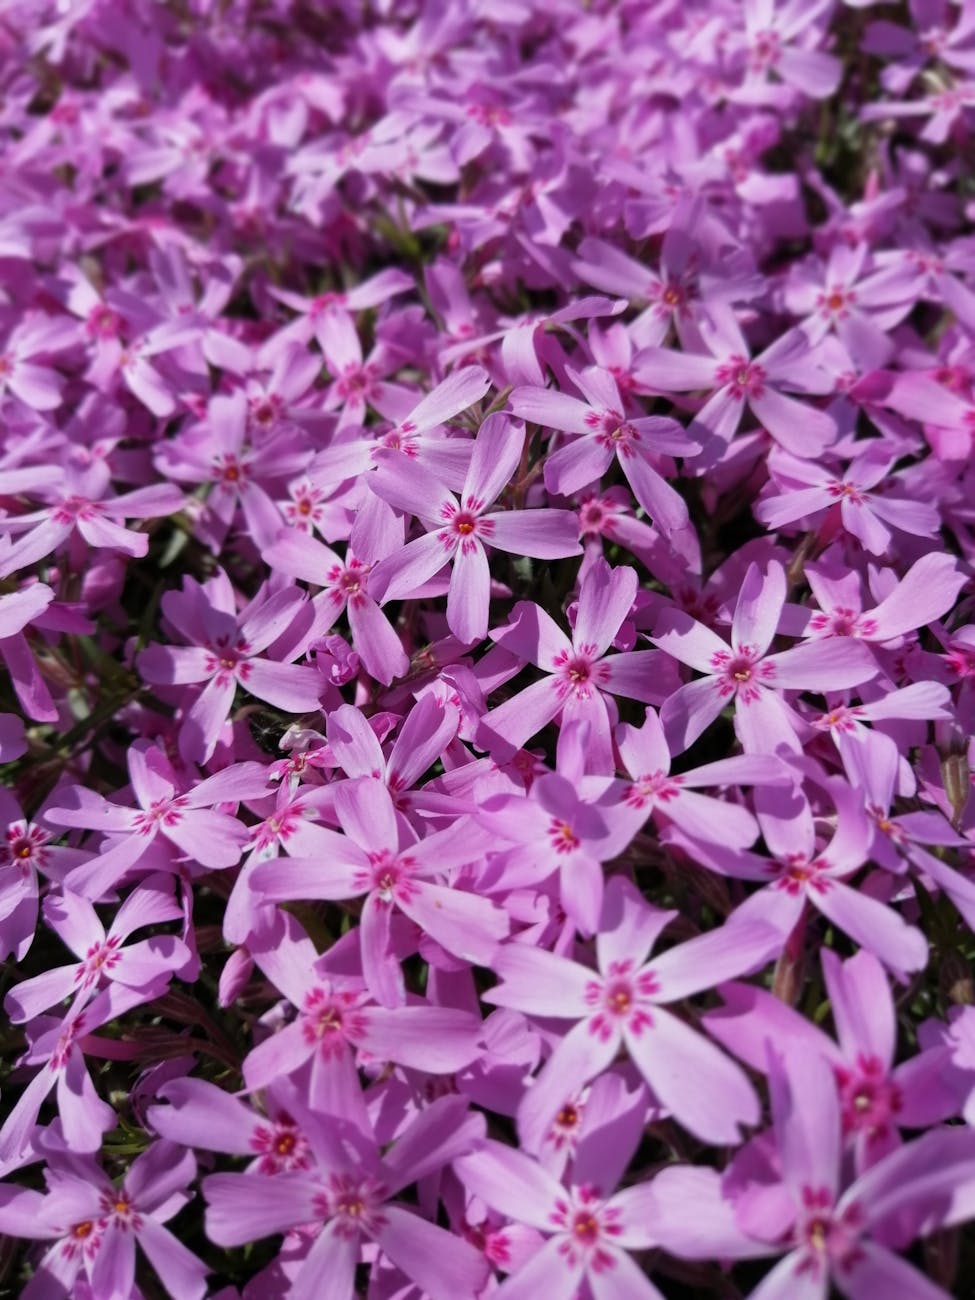 A bunch of violet-colored phlox flowers.